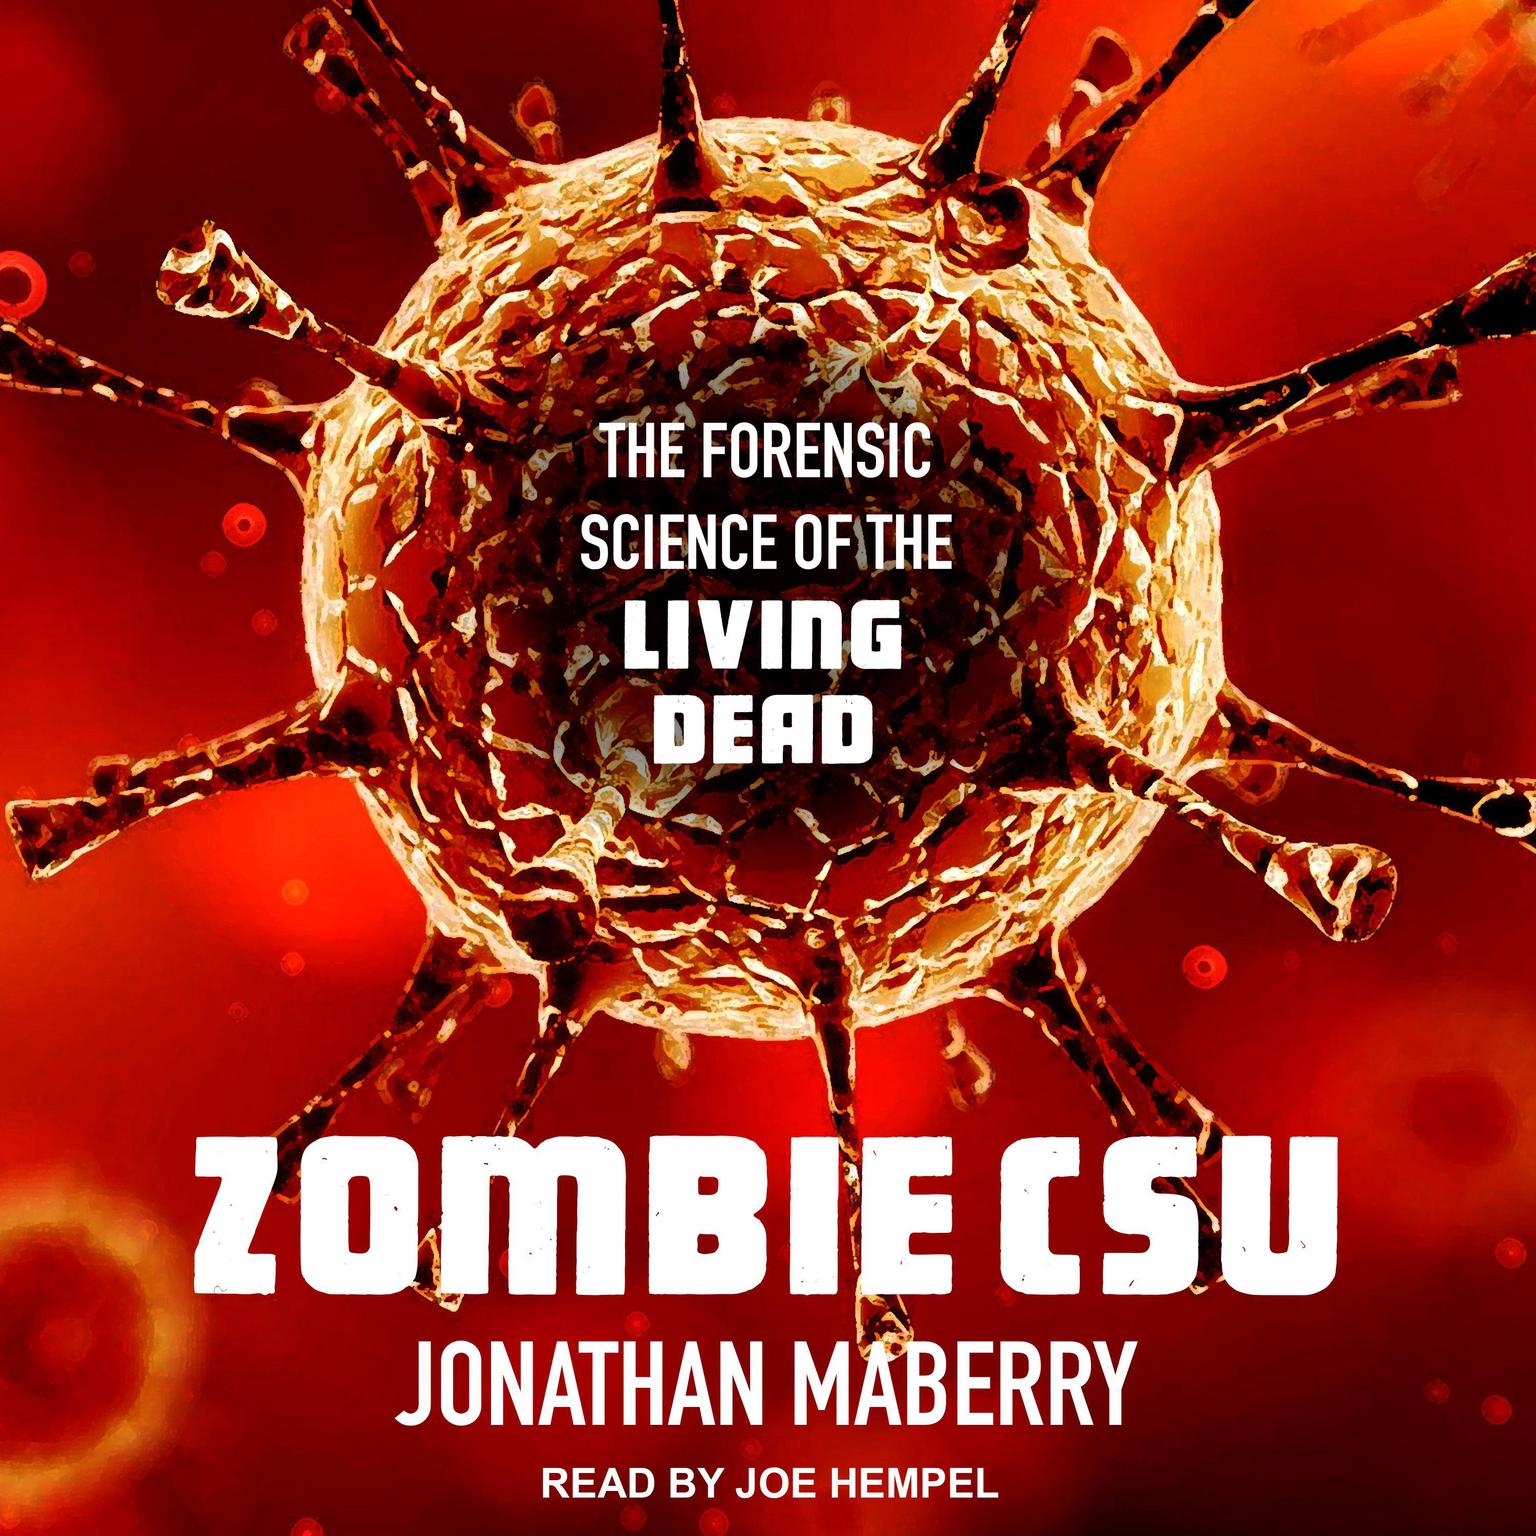 Zombie CSU: The Forensic Science of the Living Dead Audiobook, by Jonathan Maberry